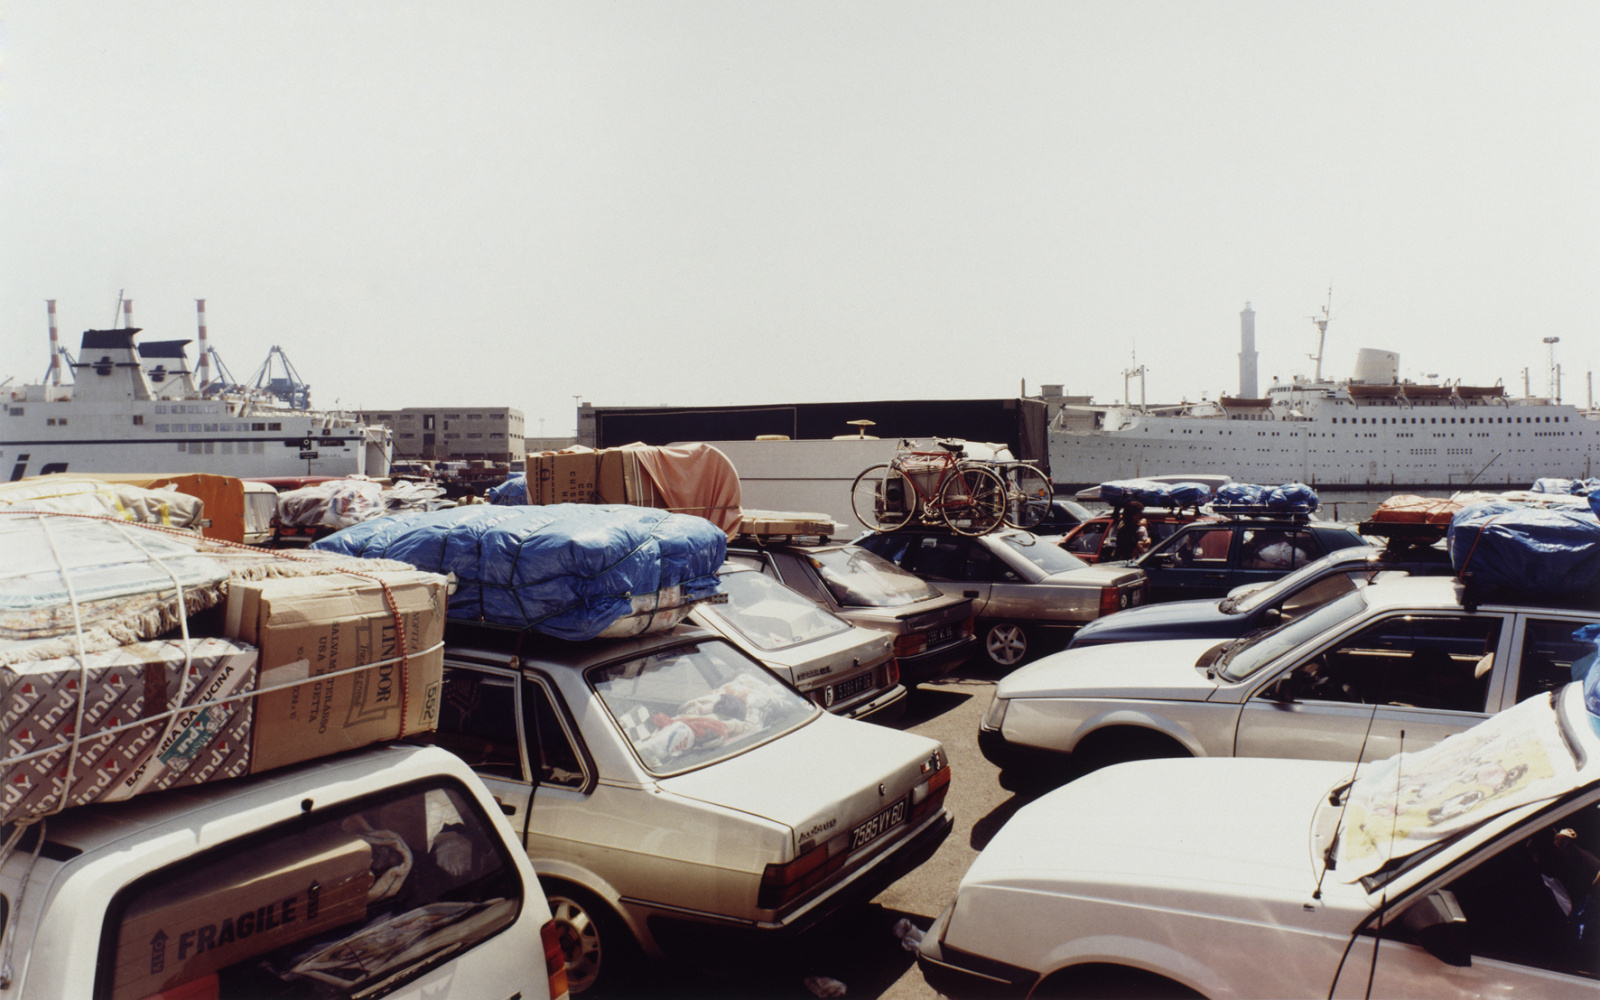 Photography of several parked cars, all fully loaded. In the background are two large cruise ships.